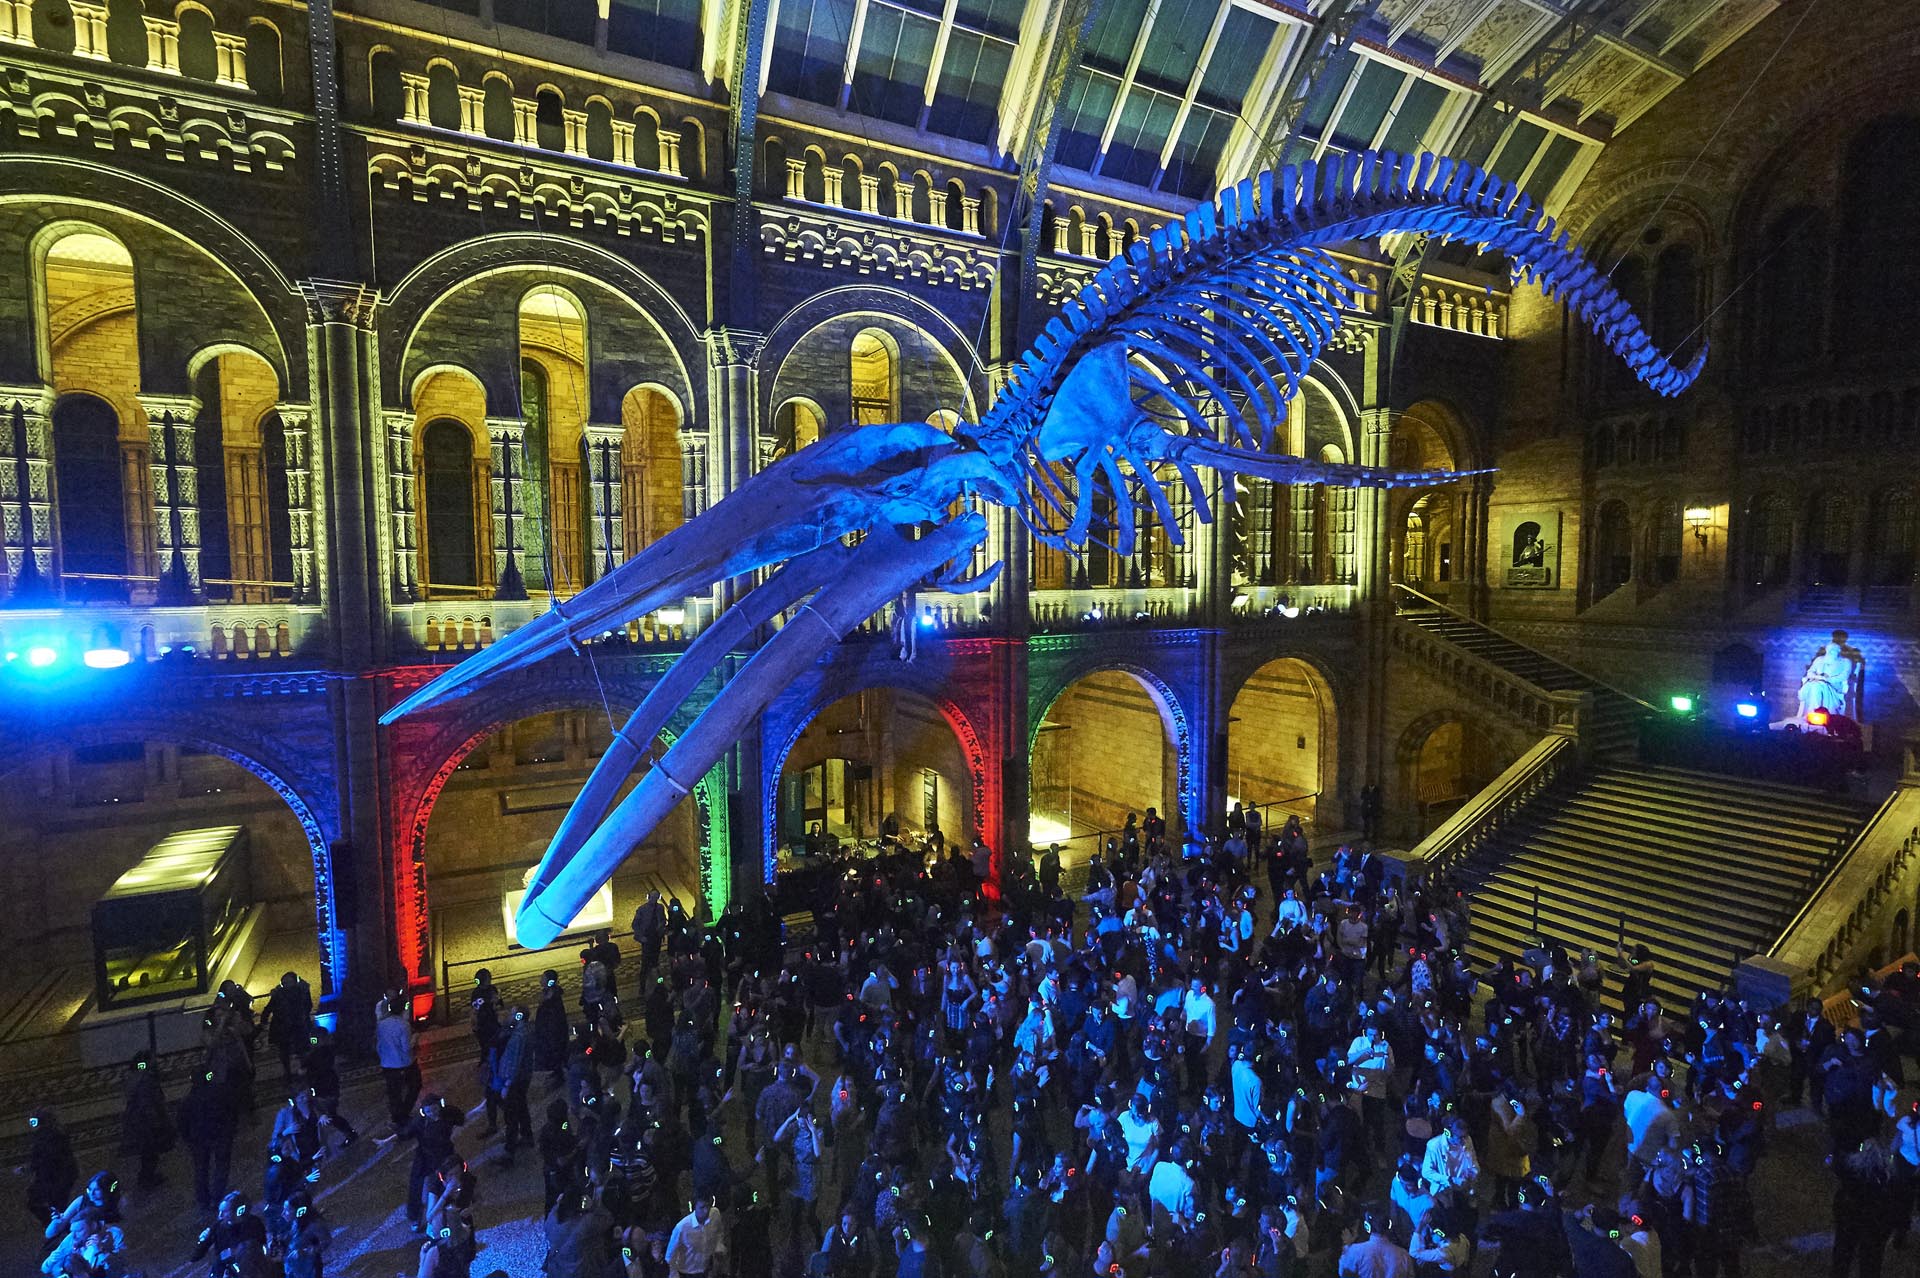 Silent disco at The Natural History Museum